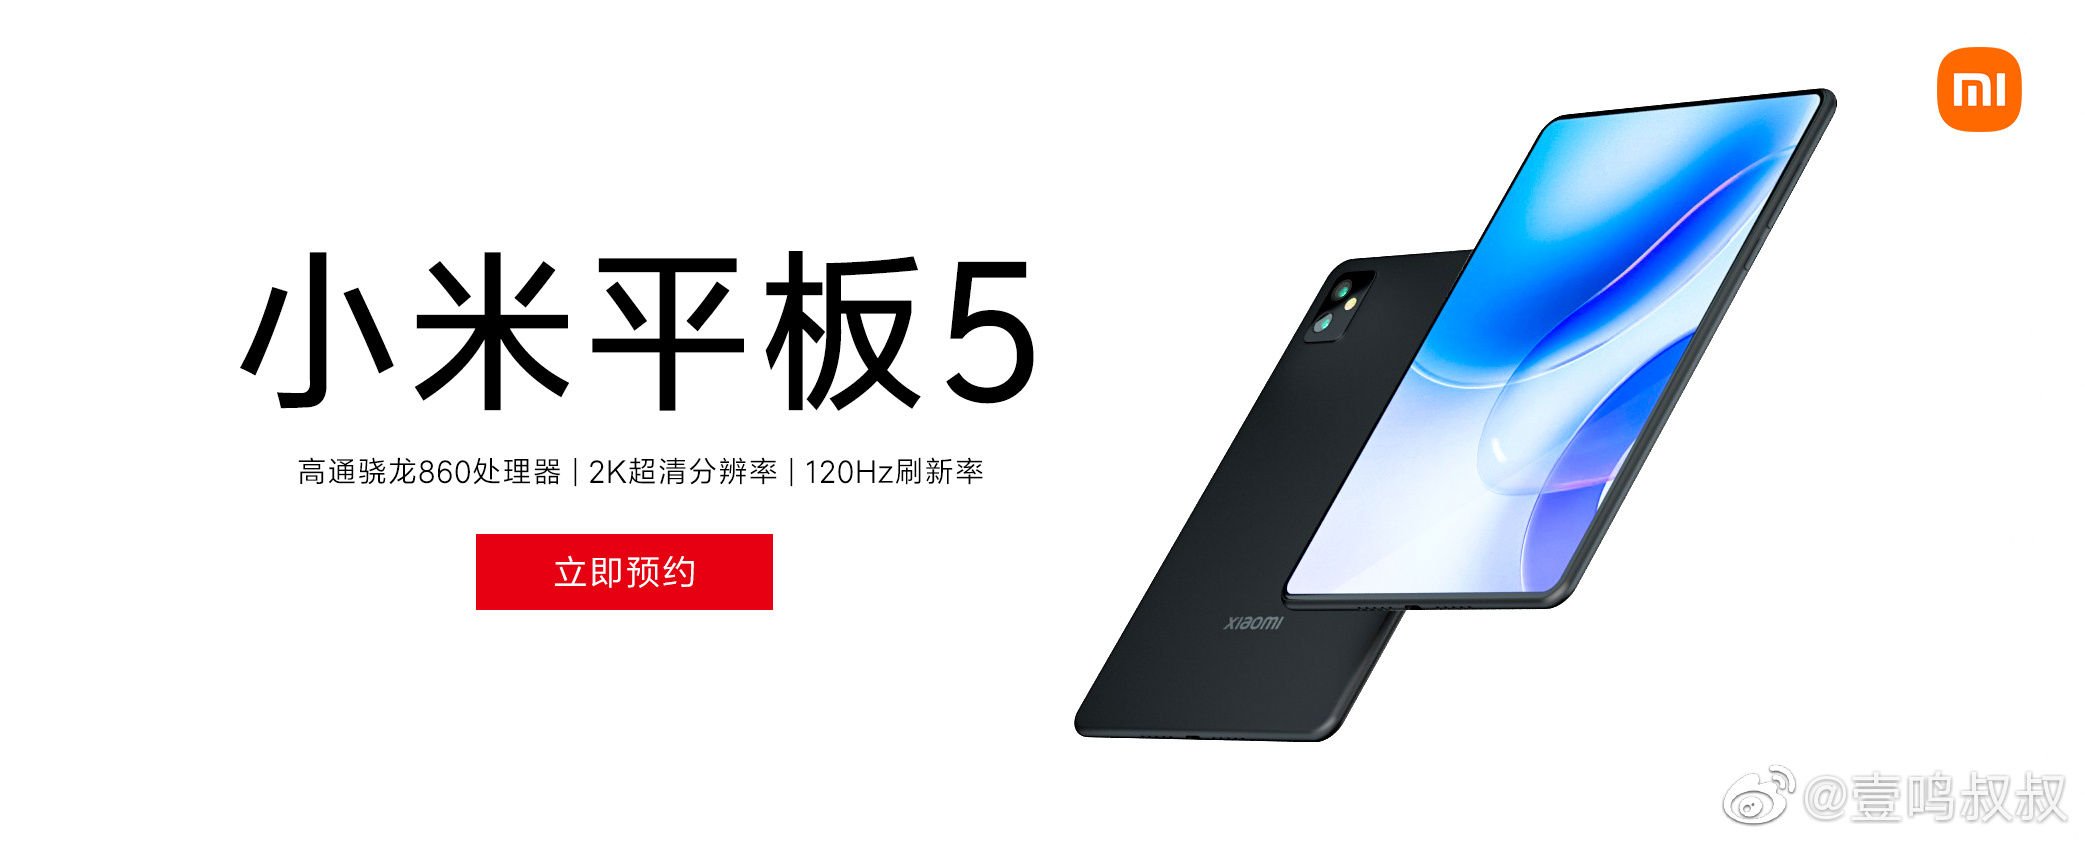 Xiaomi Mi Pad 5 design and key specification revealed through a poster